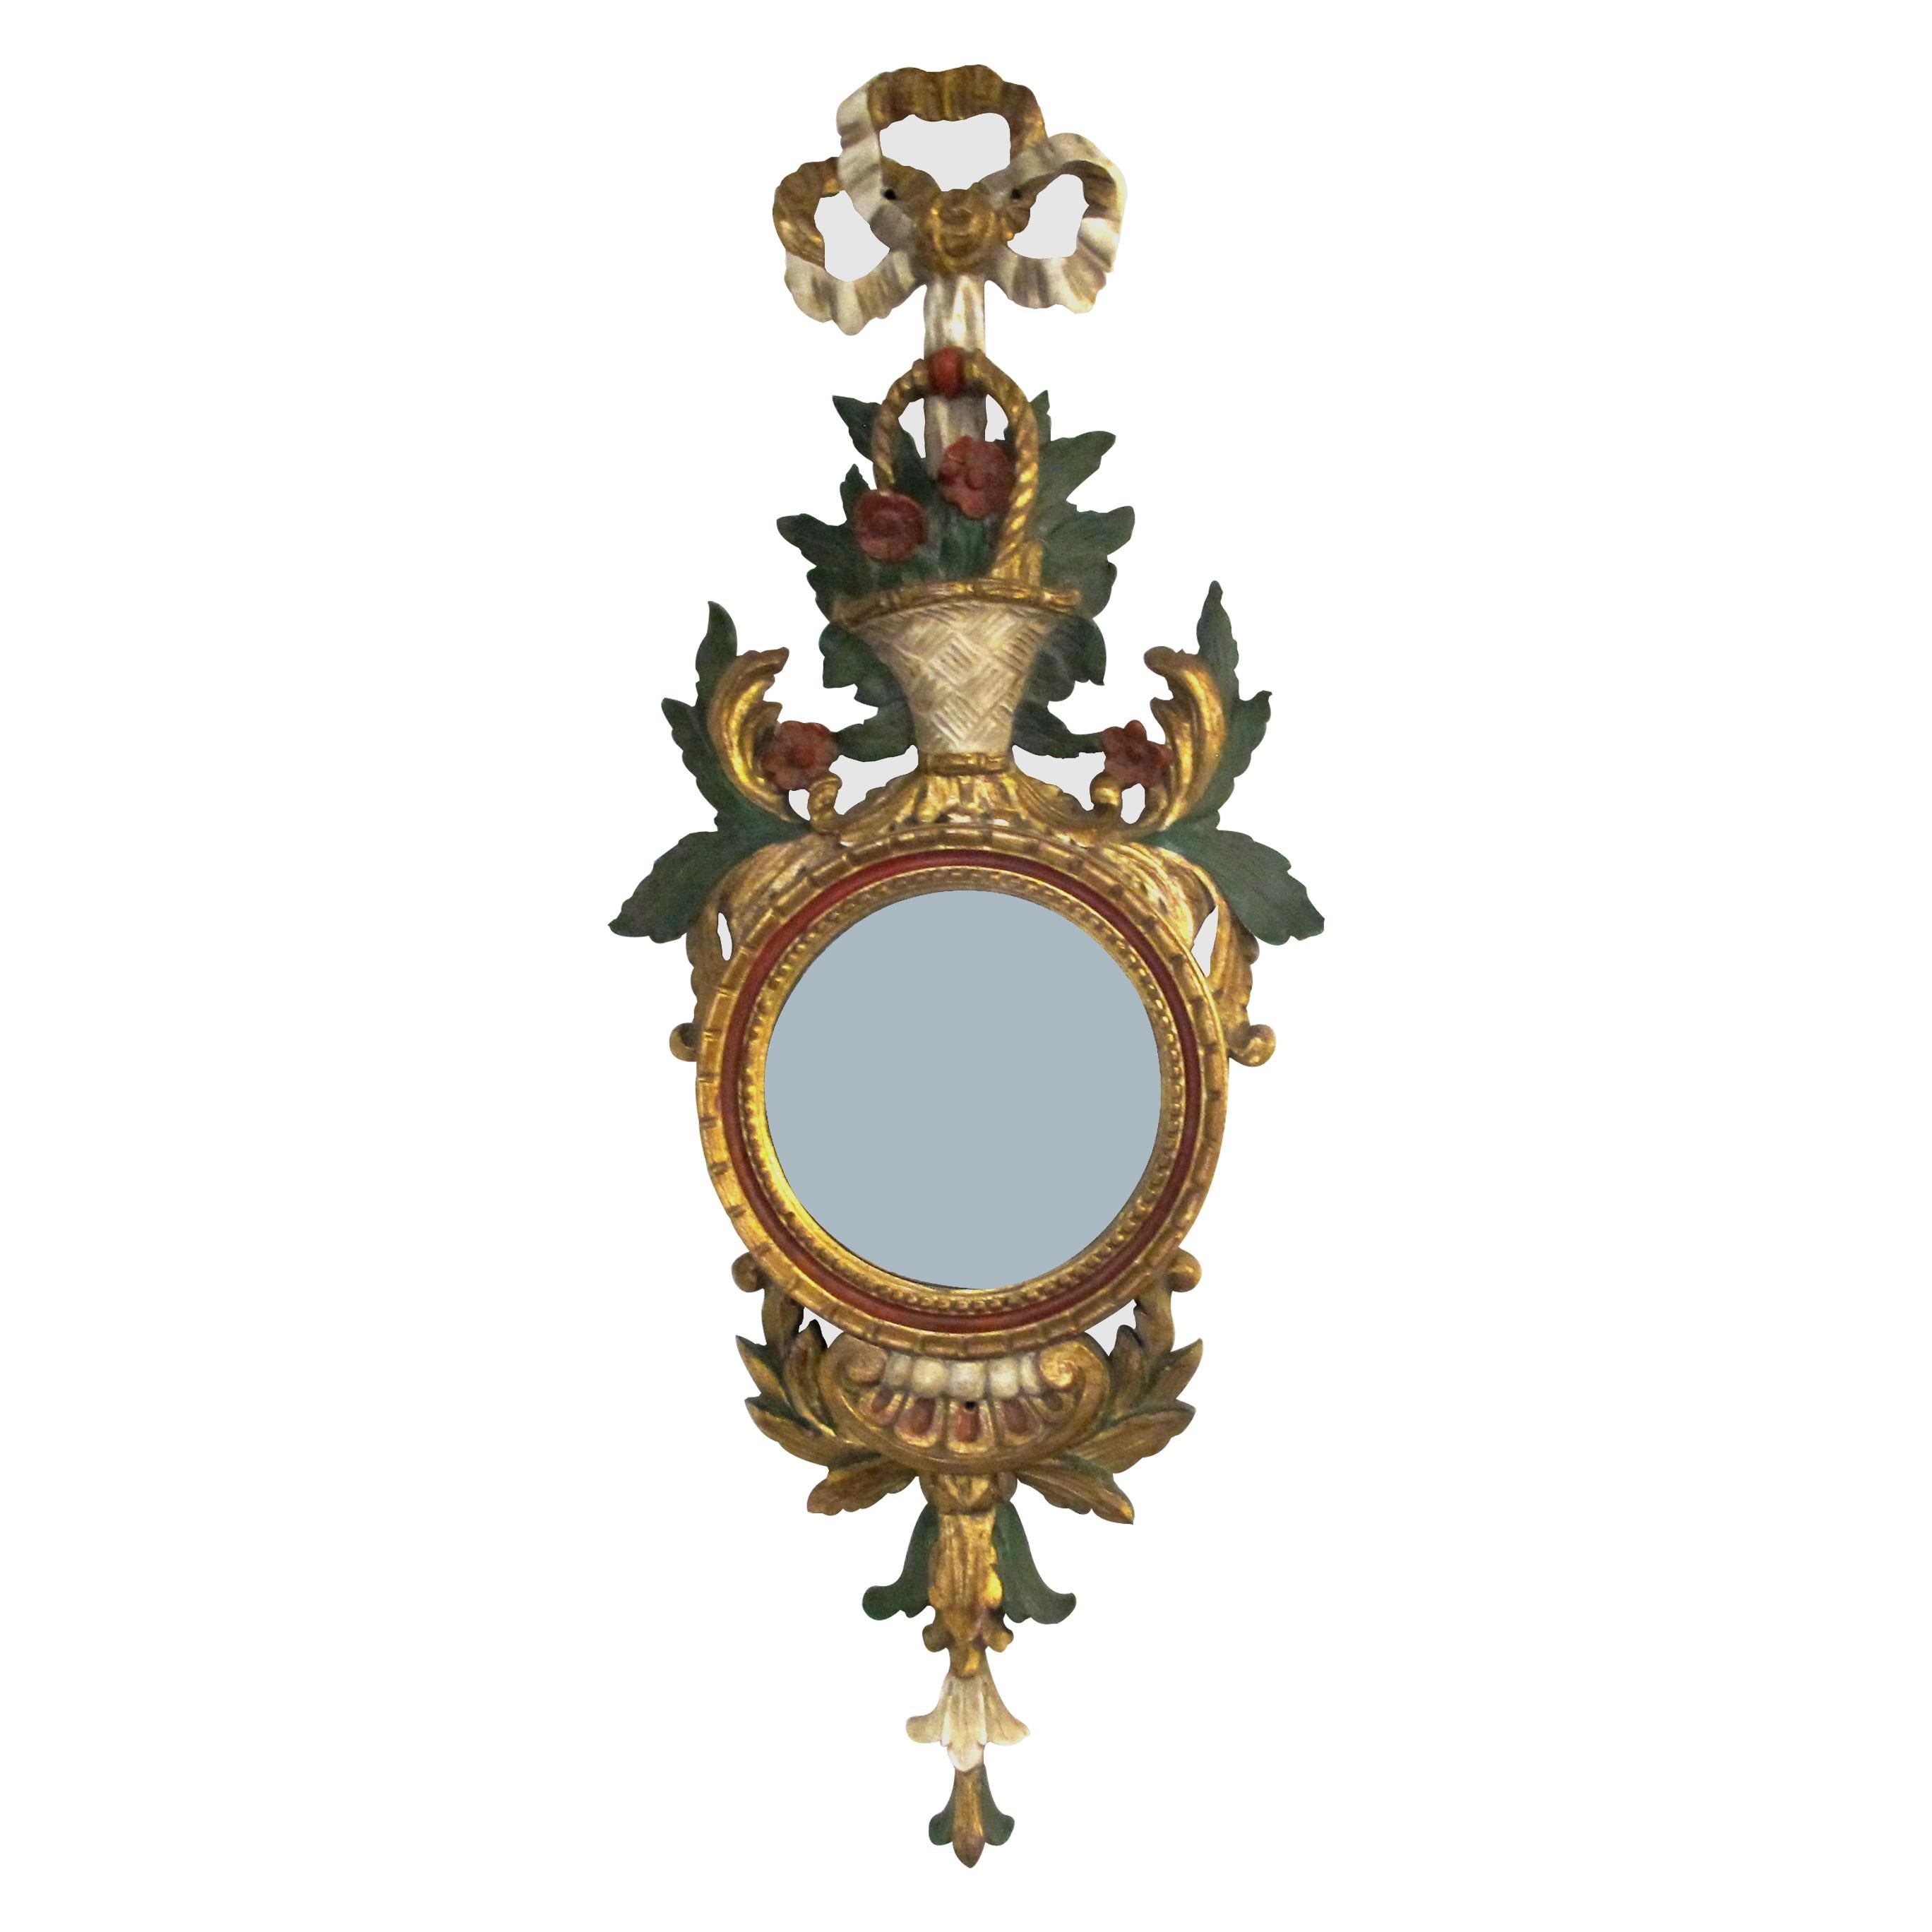 A beautiful pair of highly decorative, mid-century, mirrored wall sconces with giltwood and convex mirrors. The carving features flower baskets with ornate coloured and gilt leaves and flowers. The sconces were made in Firenze, Italy in the